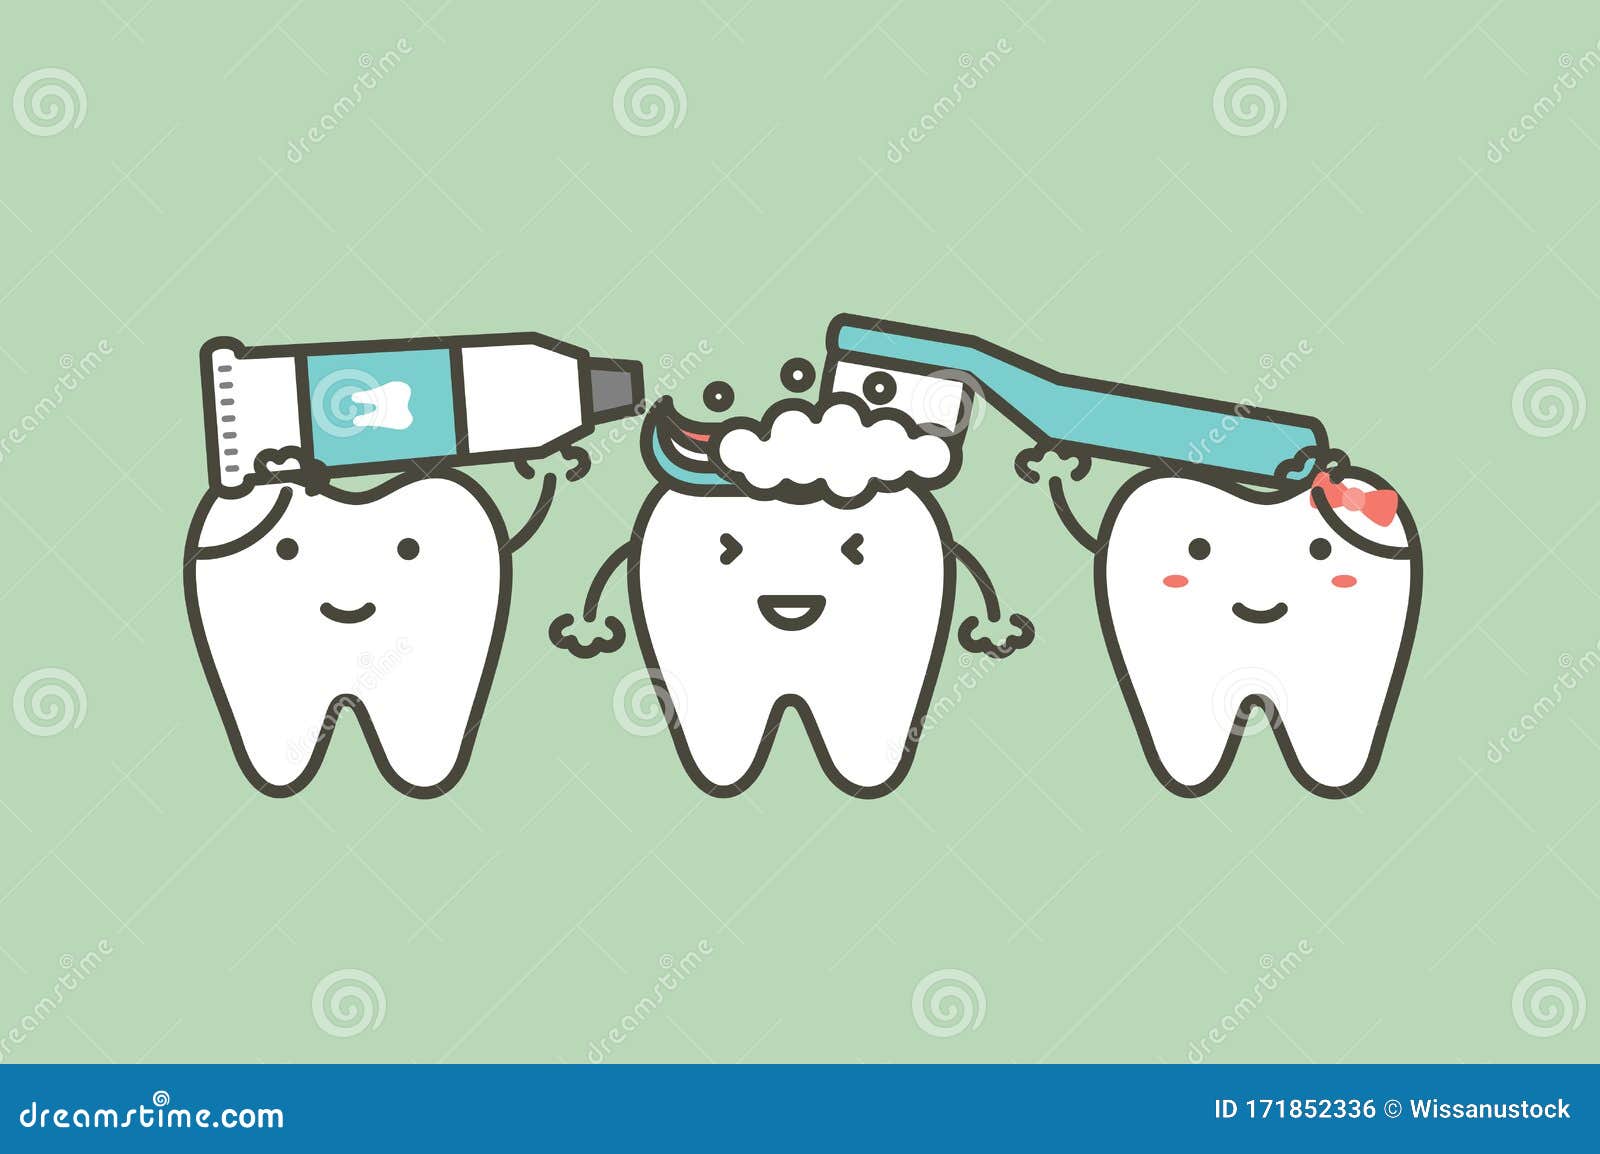 Tooth Is Holding Toothbrush And Toothpaste To Brushing Teeth For Friend Stock Vector